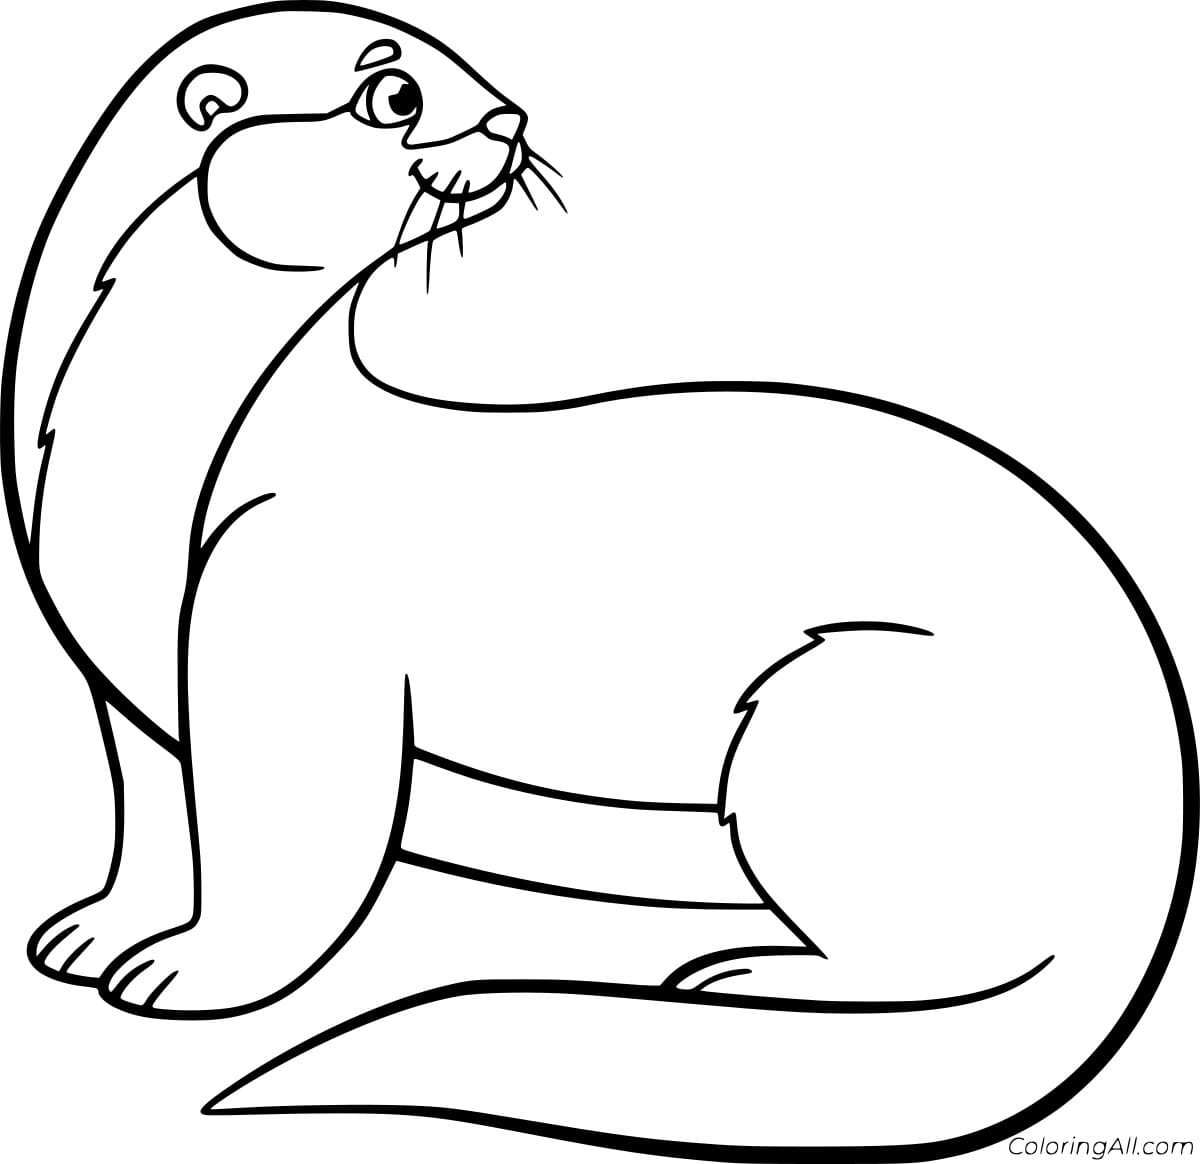 Cartoon Otter Cute Printable Coloring Page